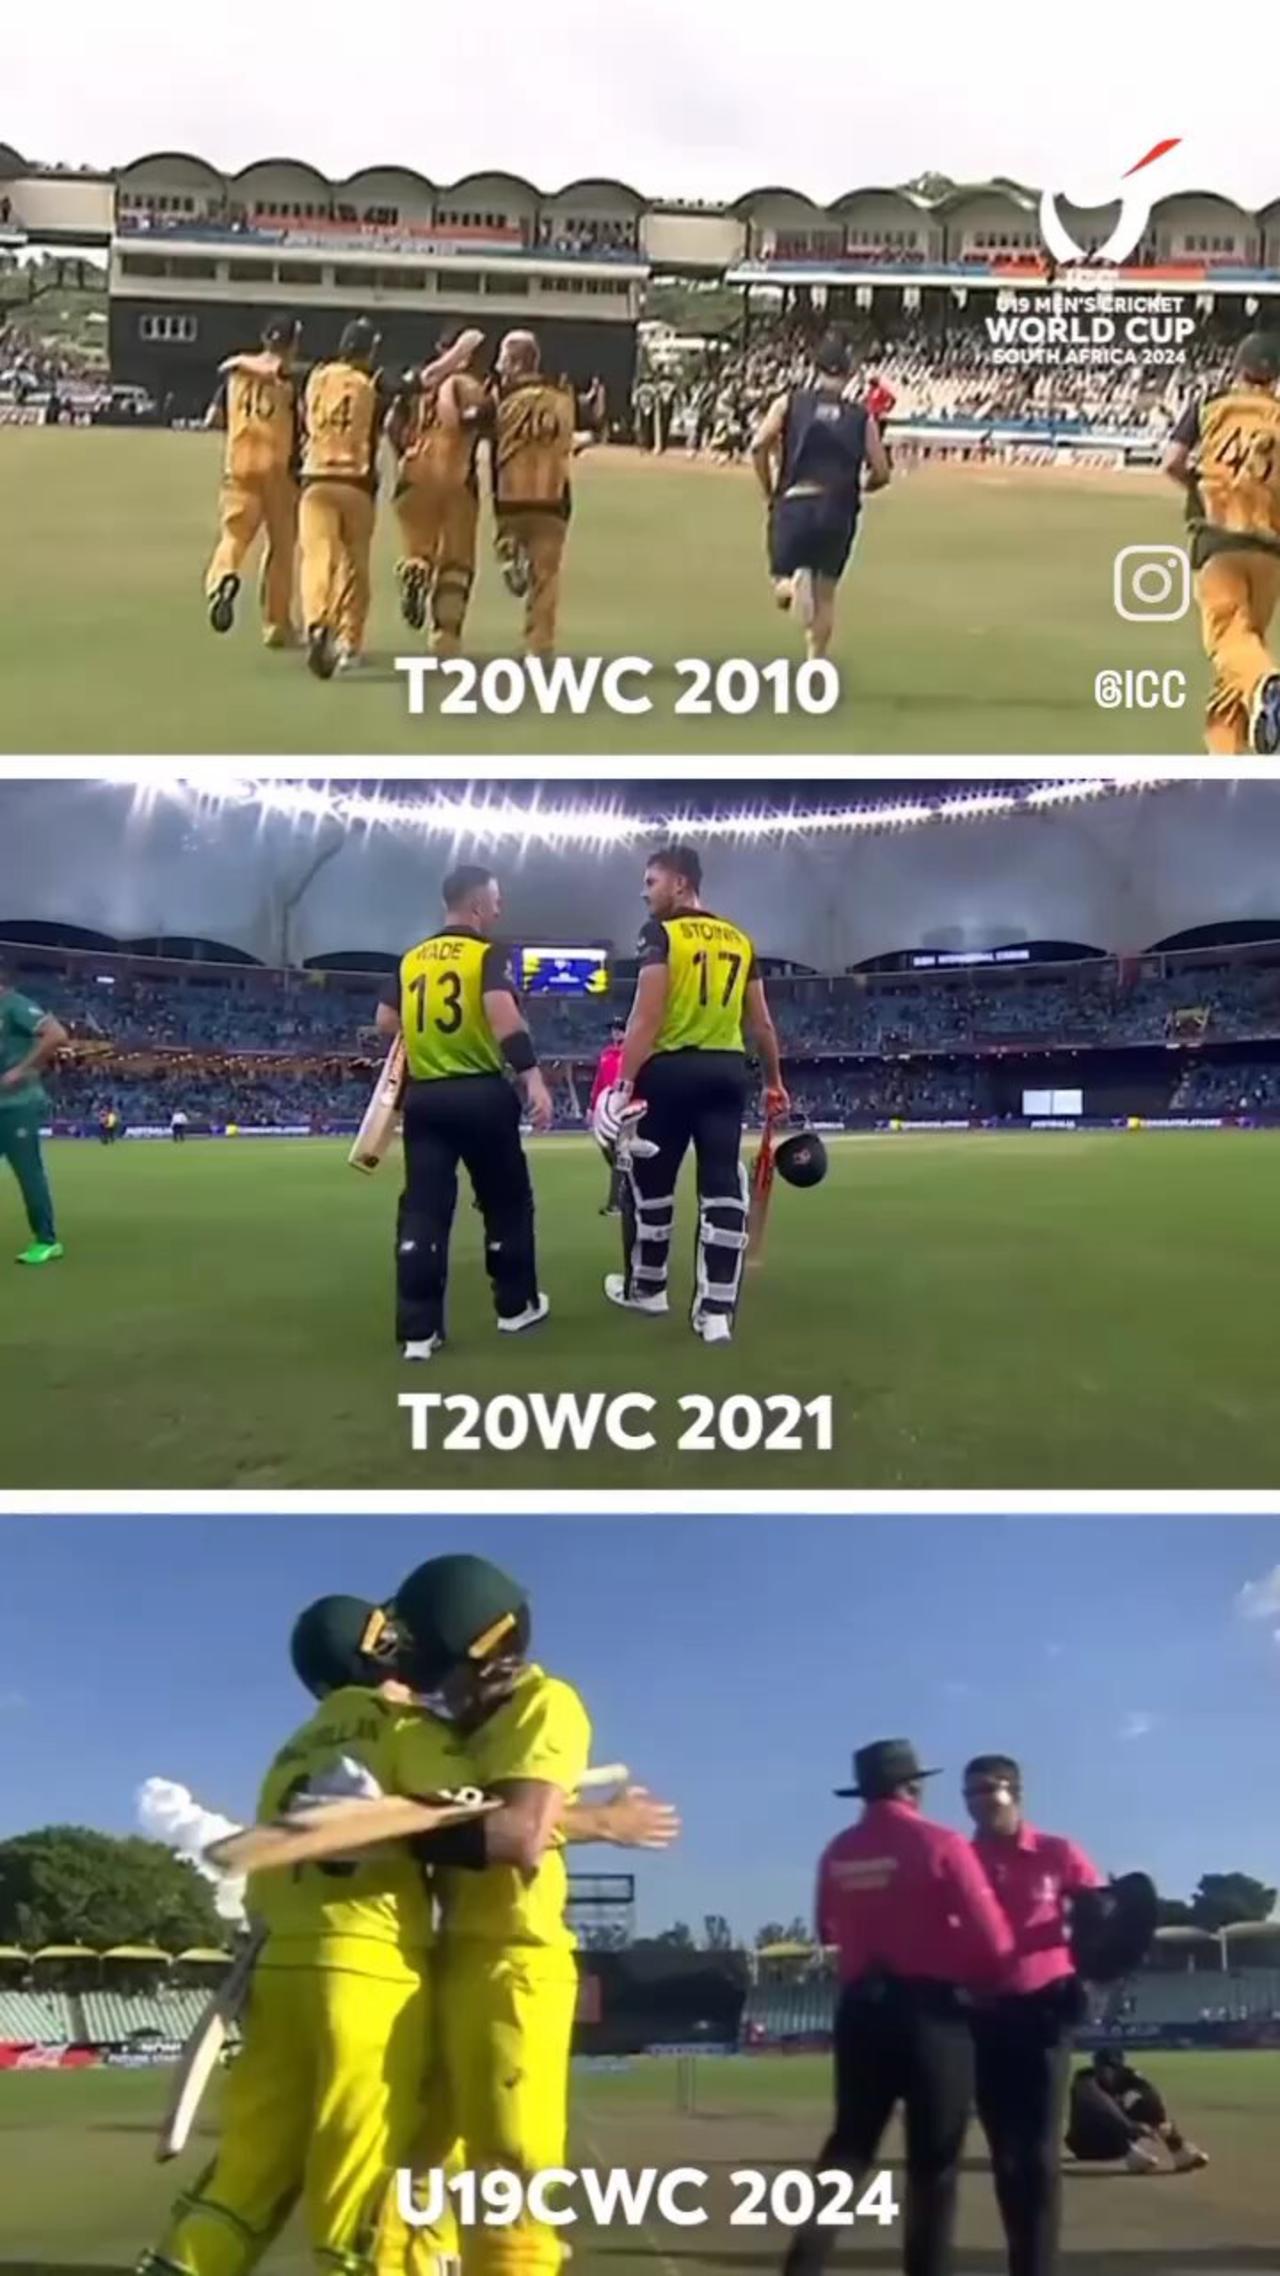 Bad luck with Australia in World Cup semi-finals! Pakistan #icc #worldcup